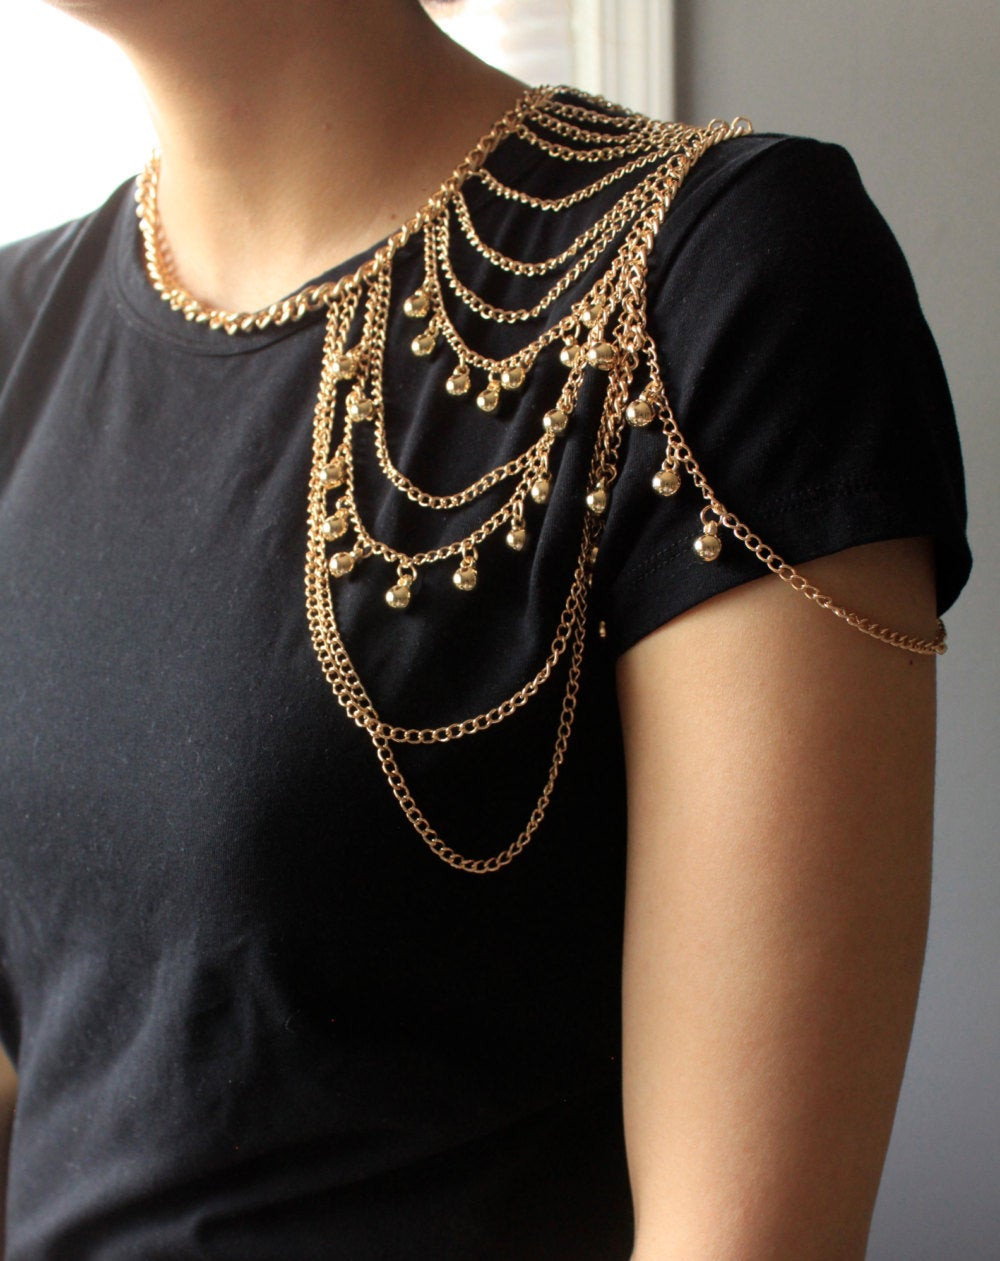 Body Necklace Jewelry
 Shoulder Jewelry Gold Shoulder Chain Body by SusVintage on